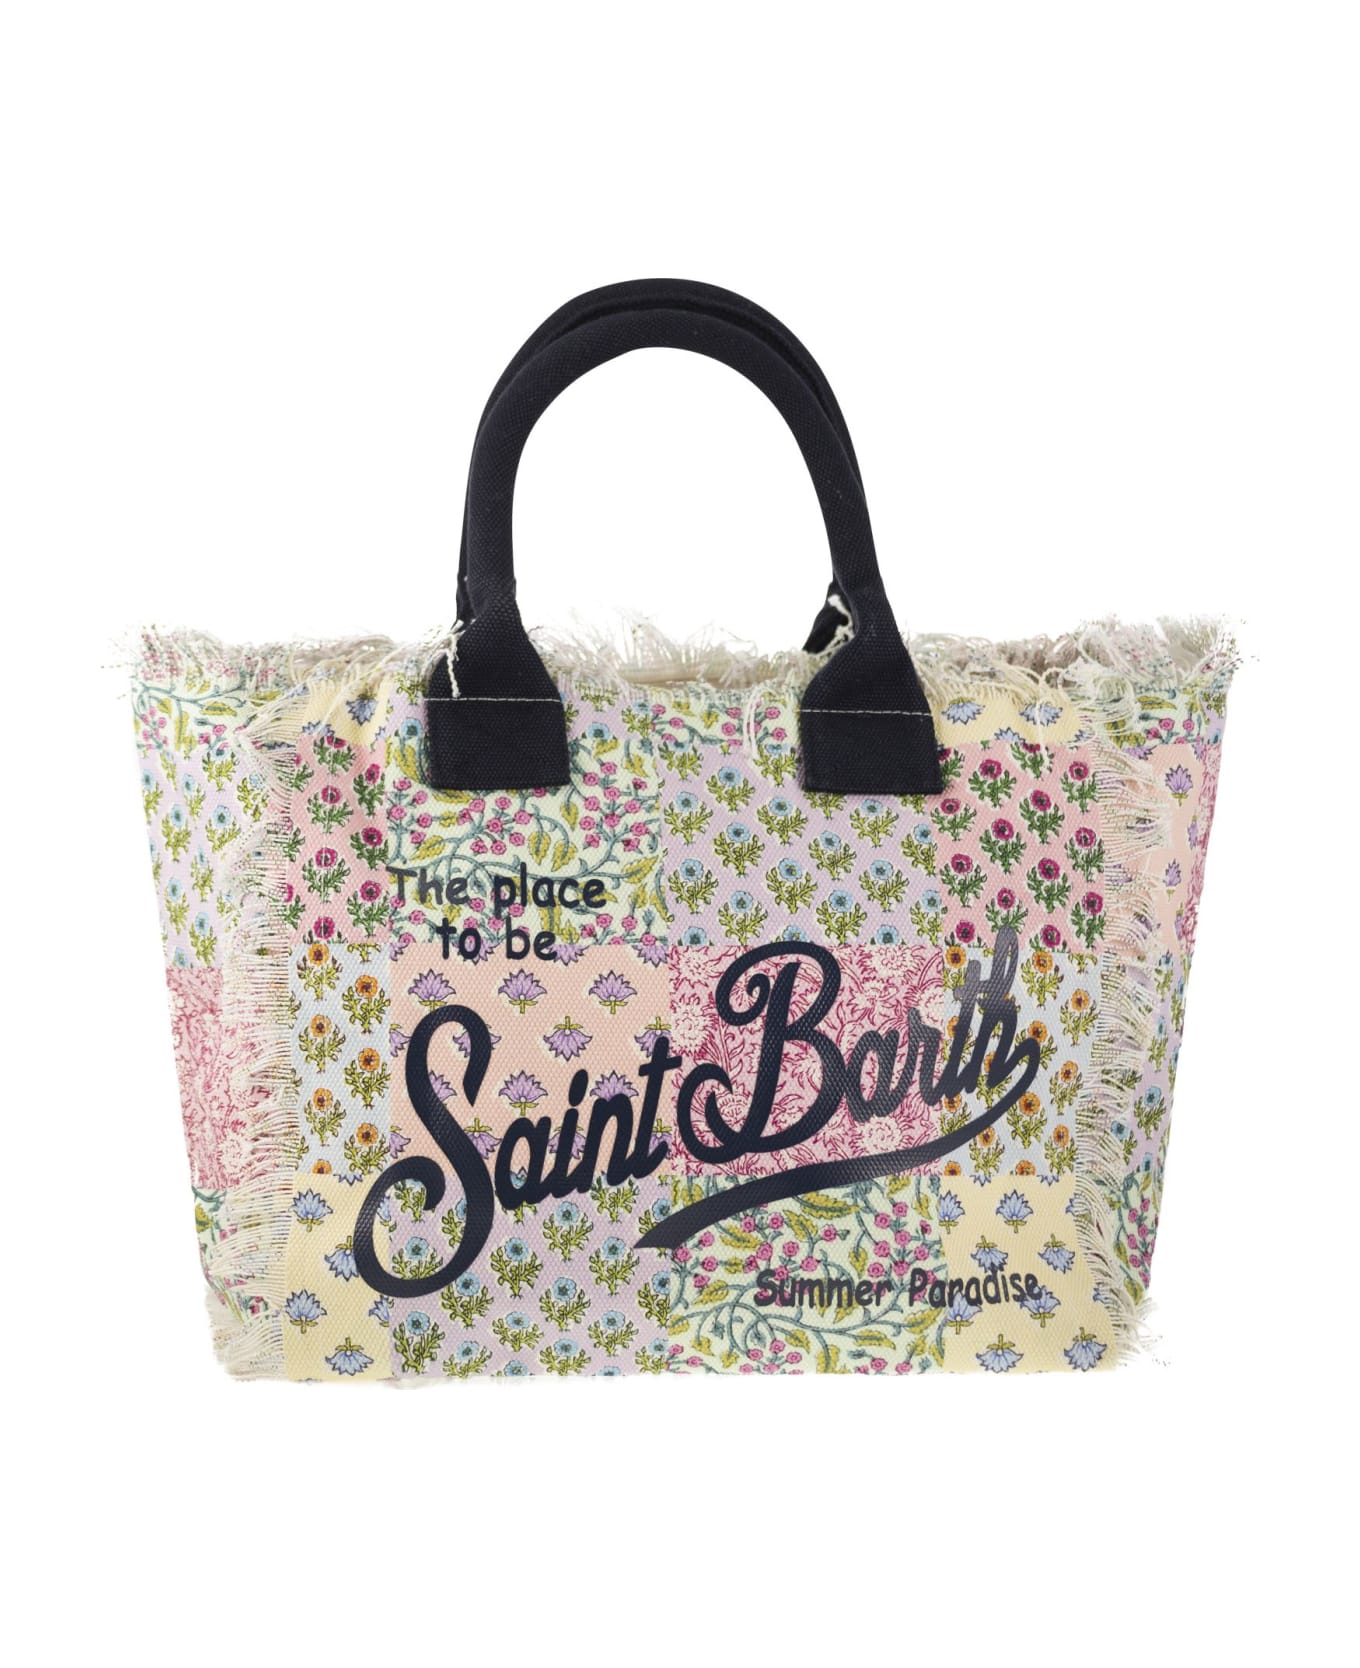 MC2 Saint Barth Vanity - Canvas Bag With Various Prints - Multicolor トートバッグ